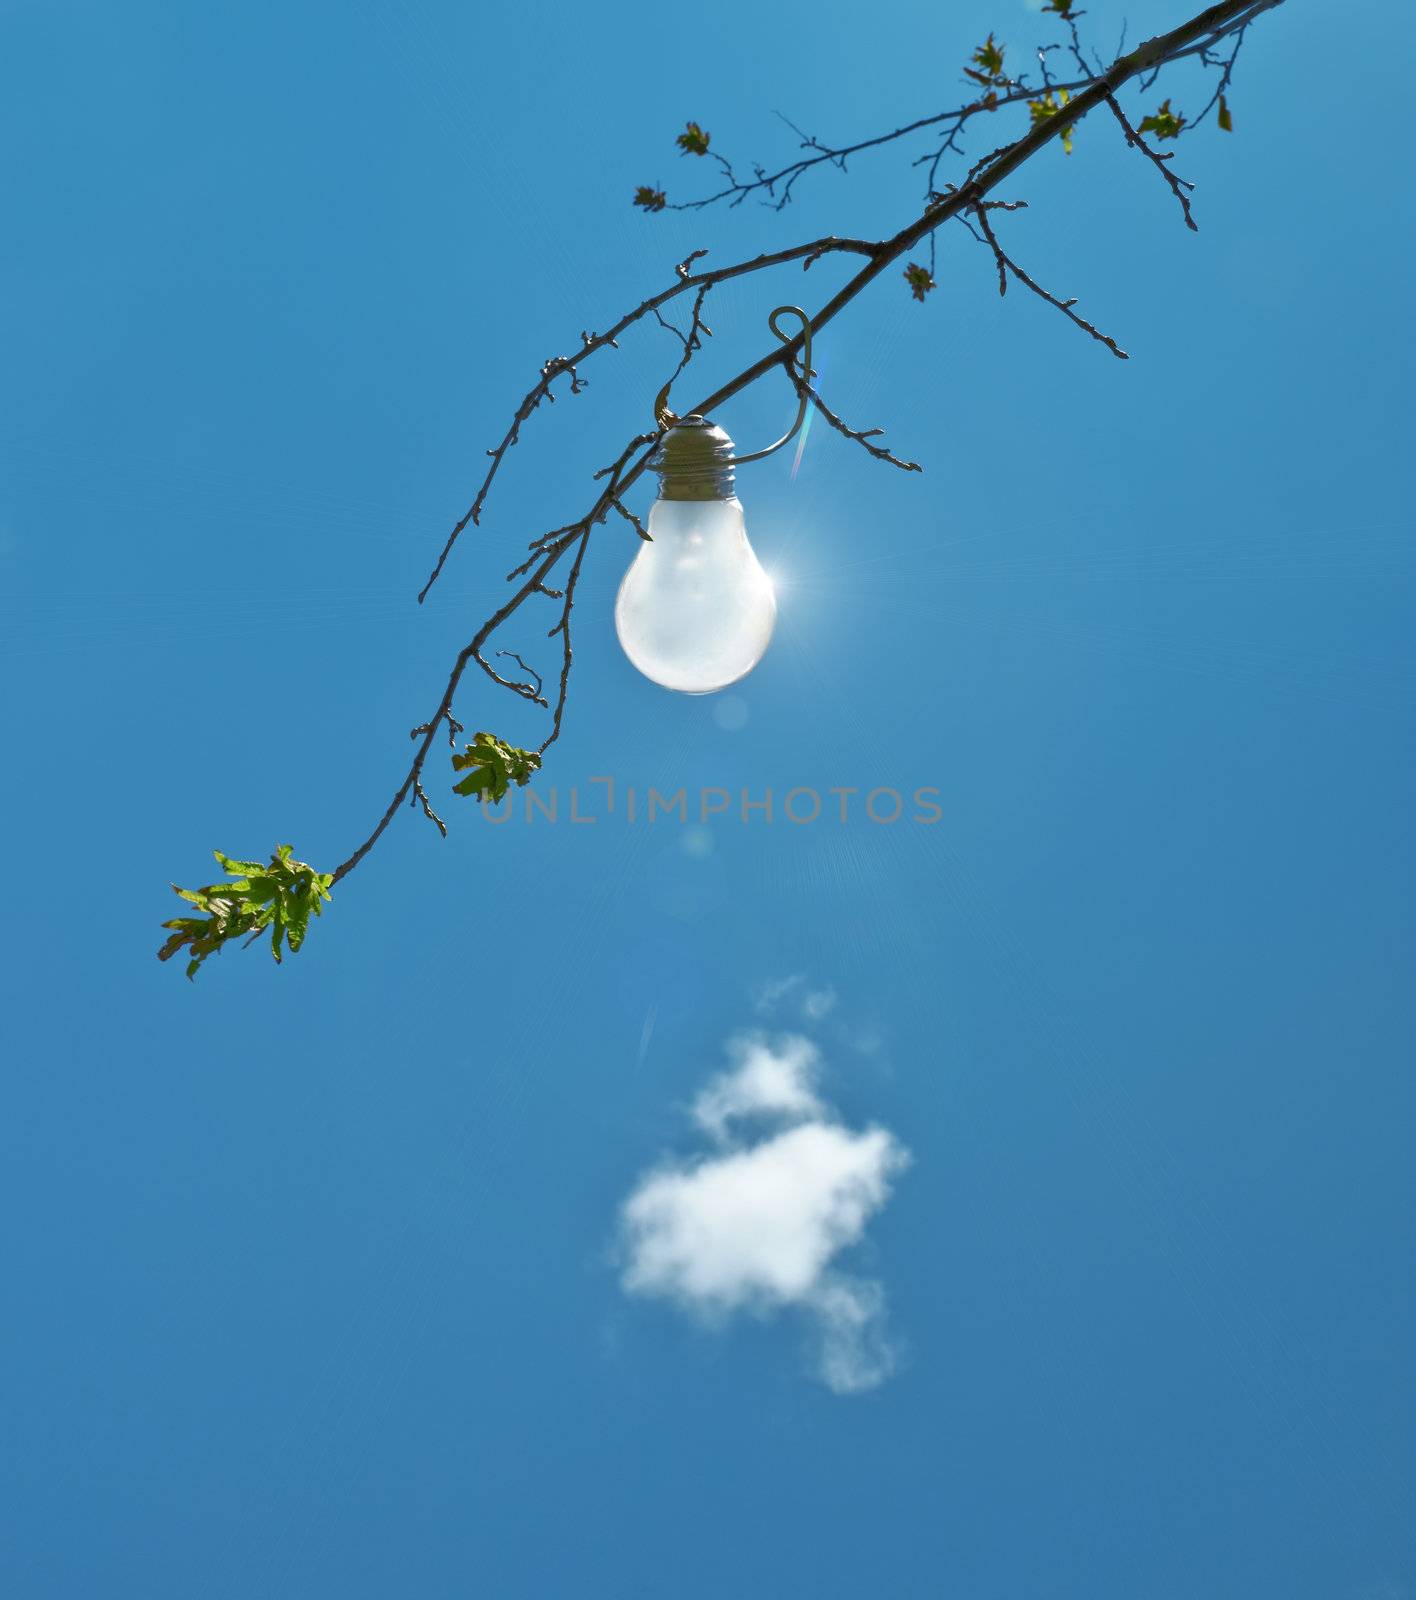 A photography of a light bulb in a tree